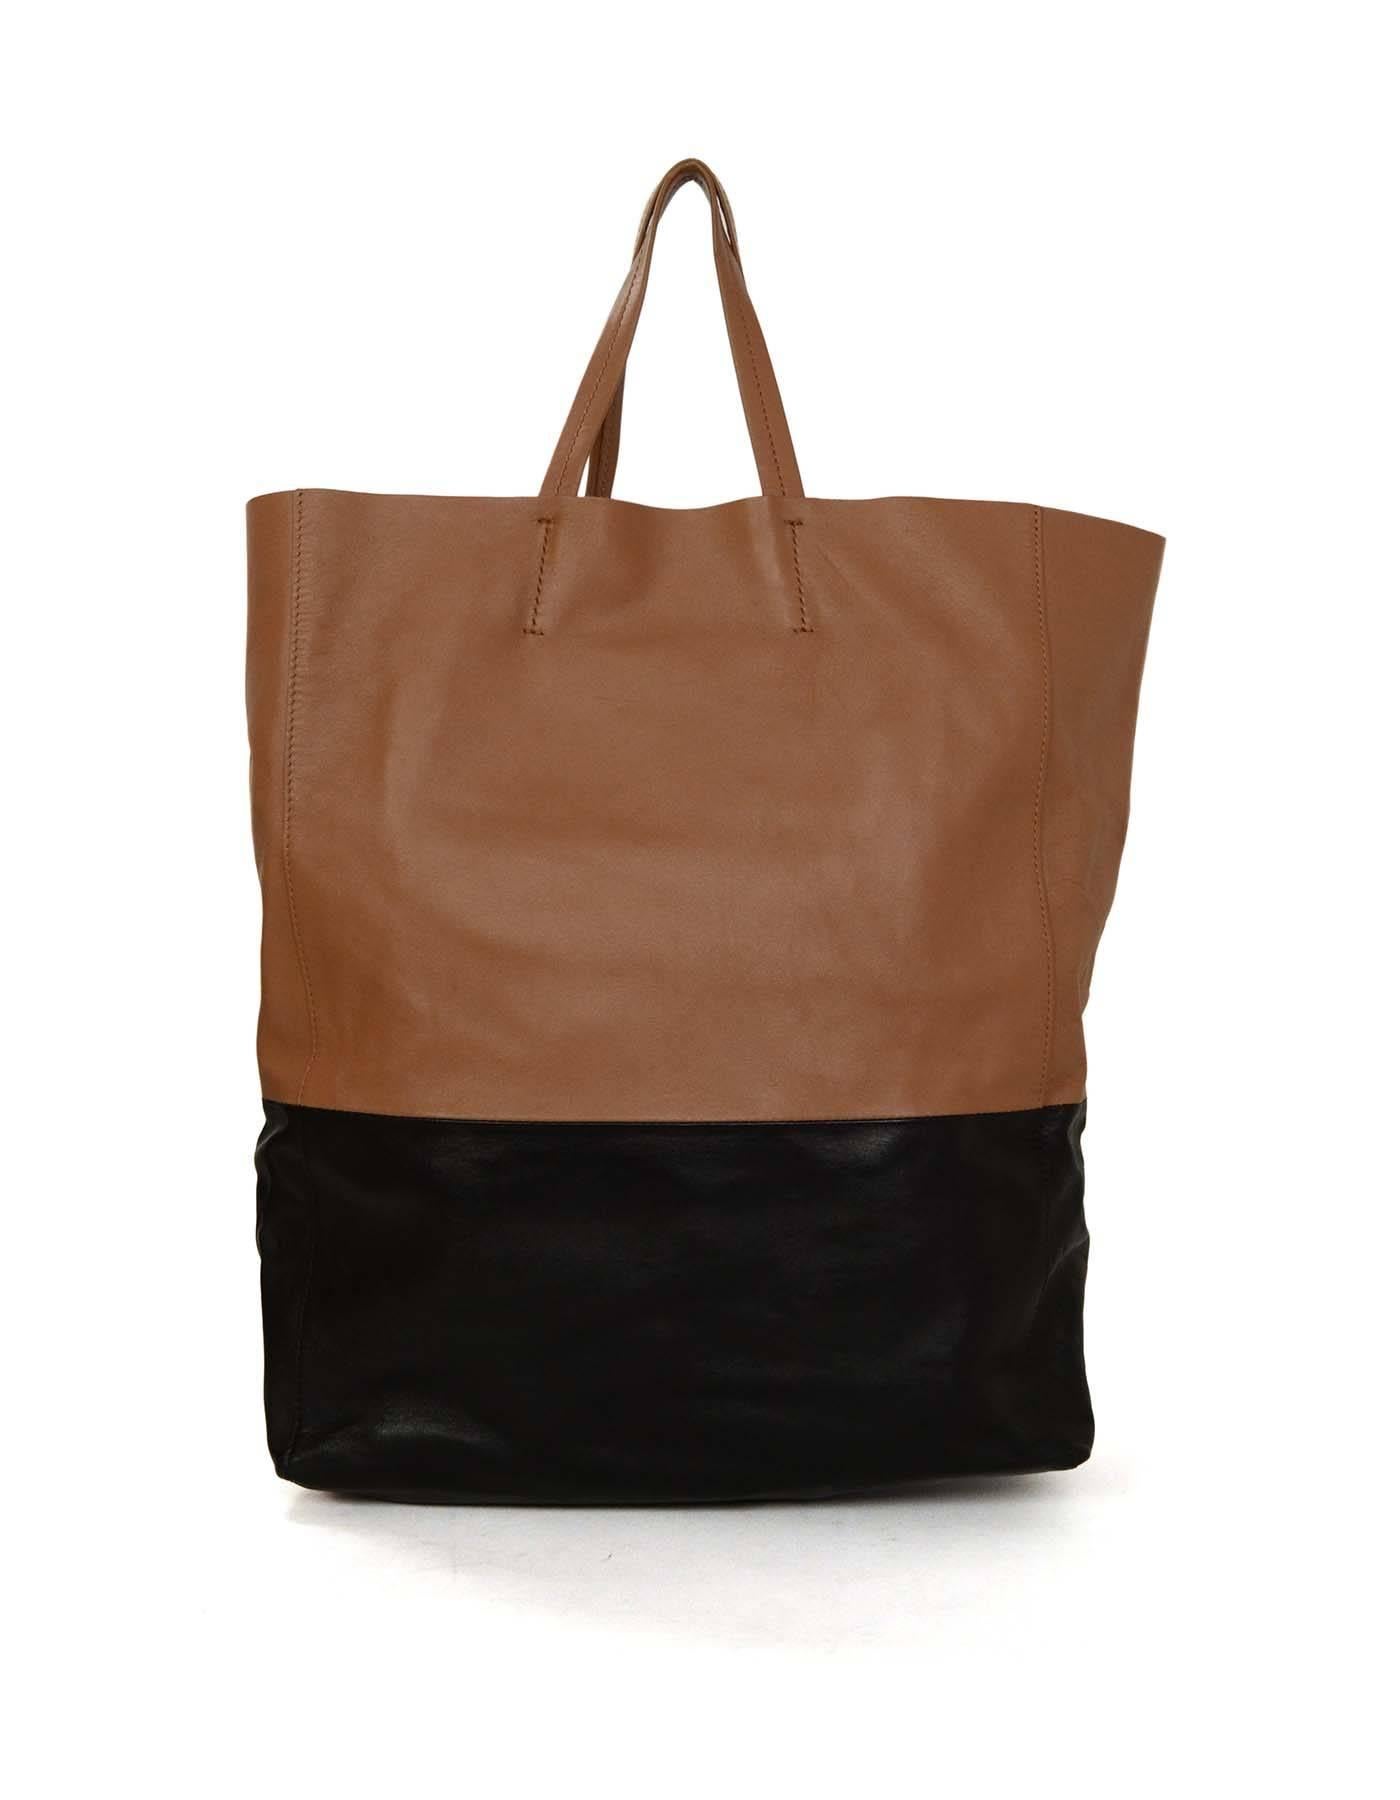 Celine Black & Tan Leather Cabas Tote

Made in: Italy
Color: Black and tan
Hardware: None
Materials: Leather
Lining: Tan suede
Closure/opening: Open top
Exterior Pockets: None
Interior Pockets: One internal pocket with zipper
Serial